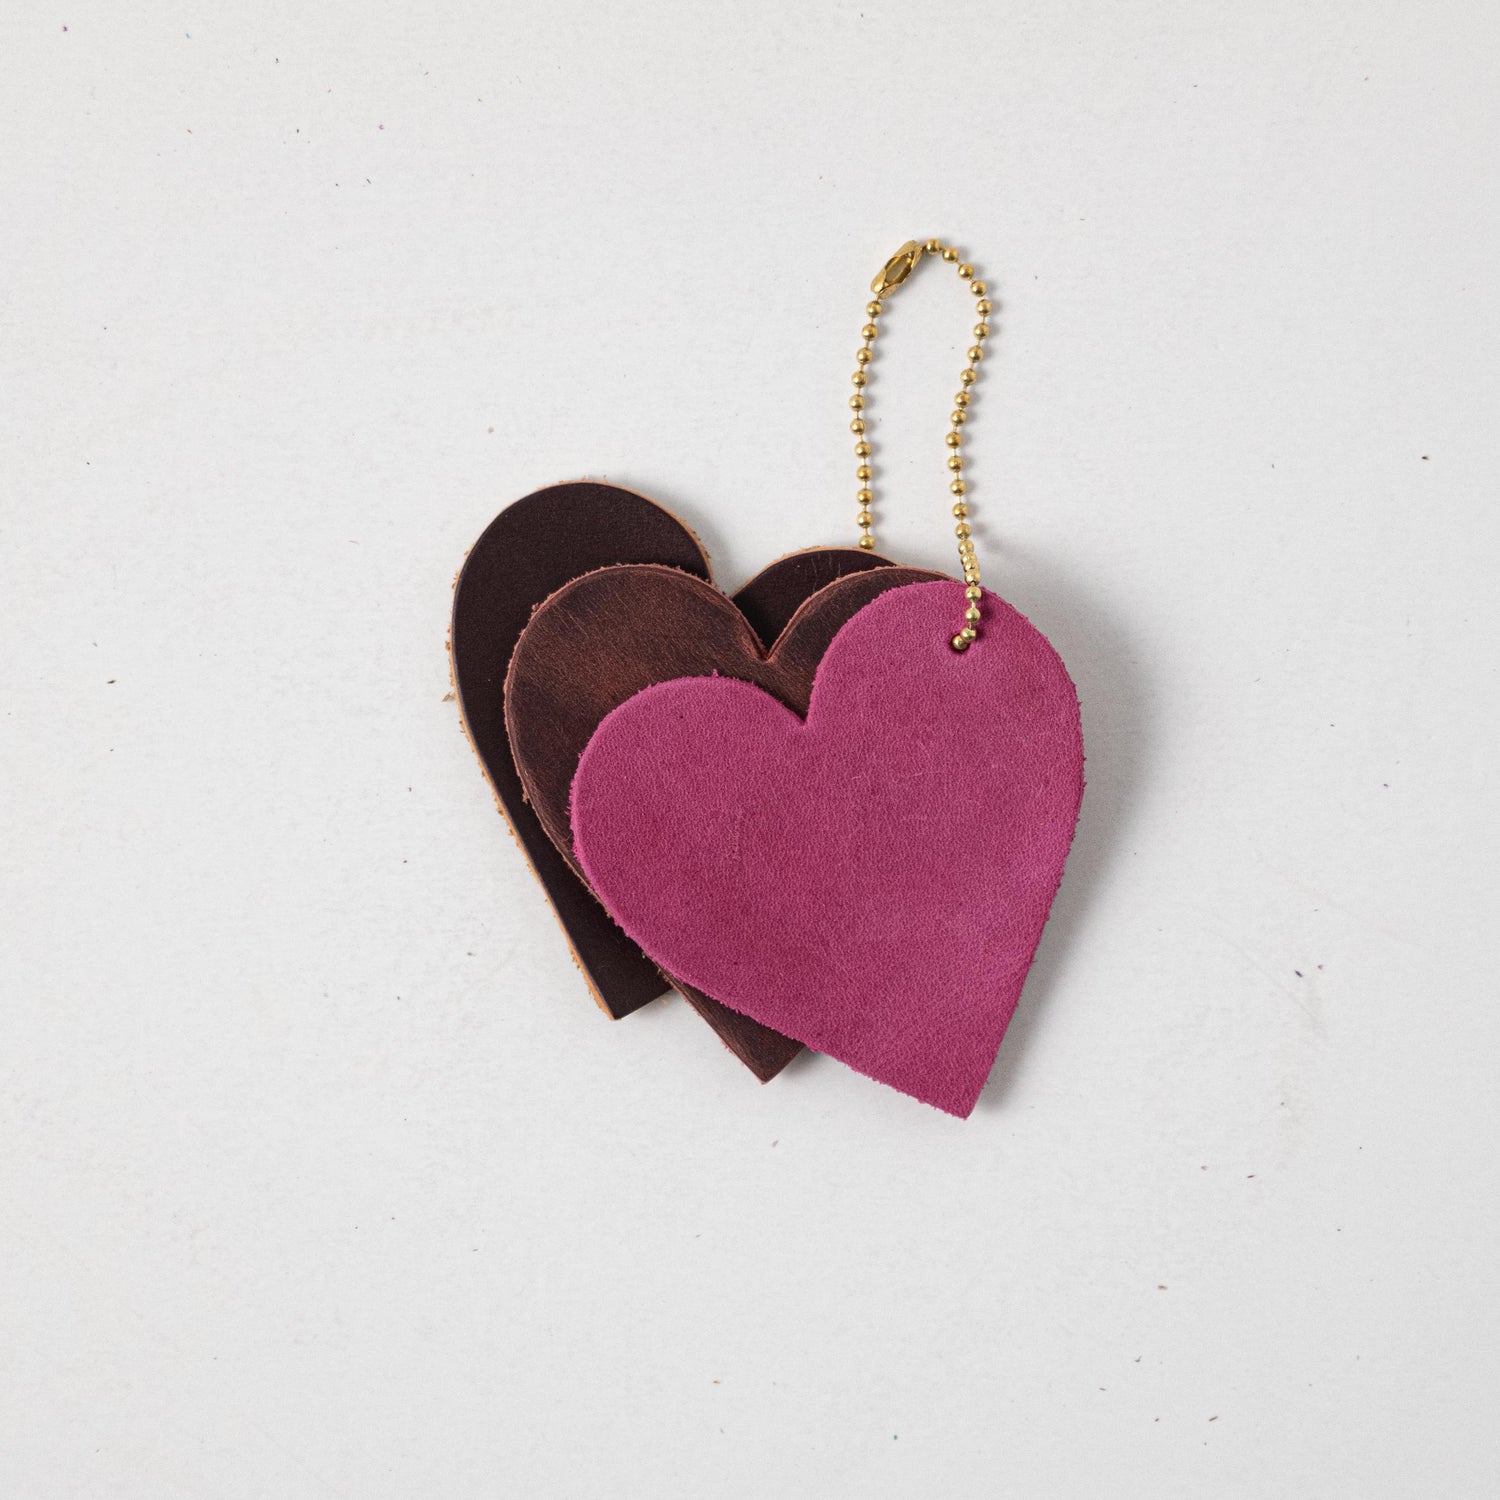 KMM & Co. Pink Heart Charms | Leather Bag Charms Handmade in The USA